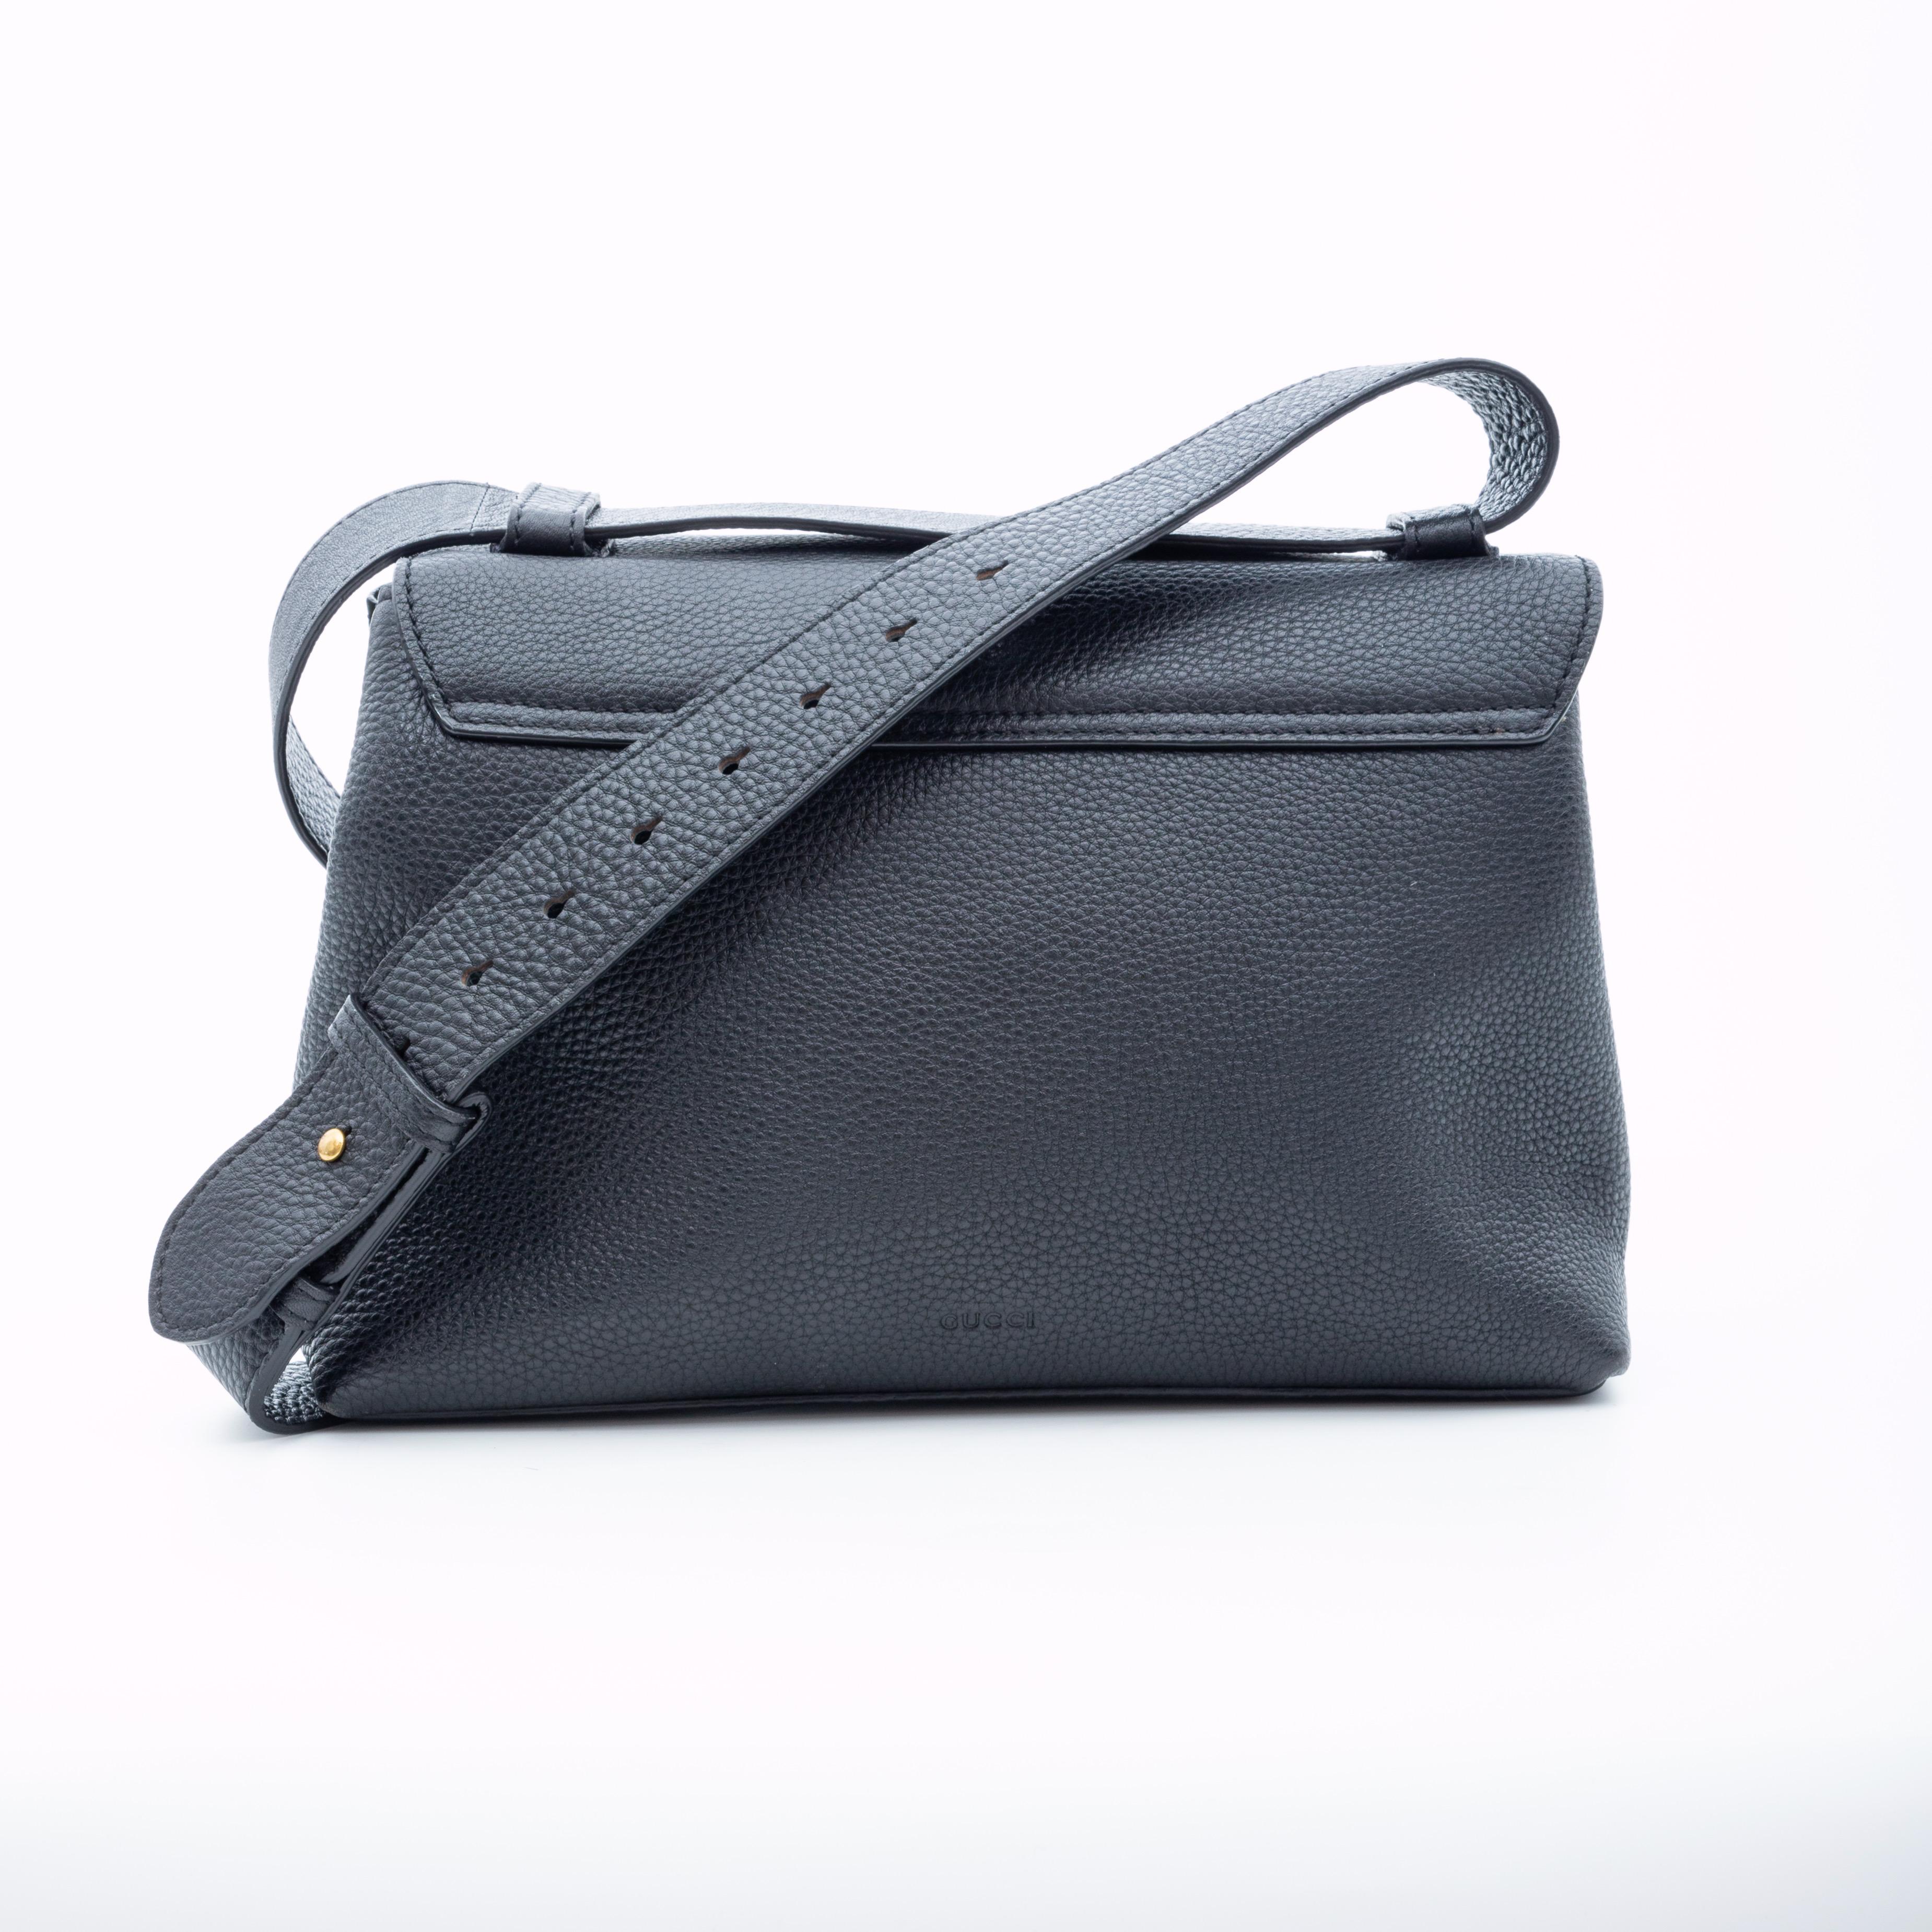 This bag is made with durable grained calfskin in black. The bag features an aged gold tone GG on the front flap, an extra wide flat leather shoulder strap, push lock closure, beige woven fabric lining and a partitioned interior with slip and zip